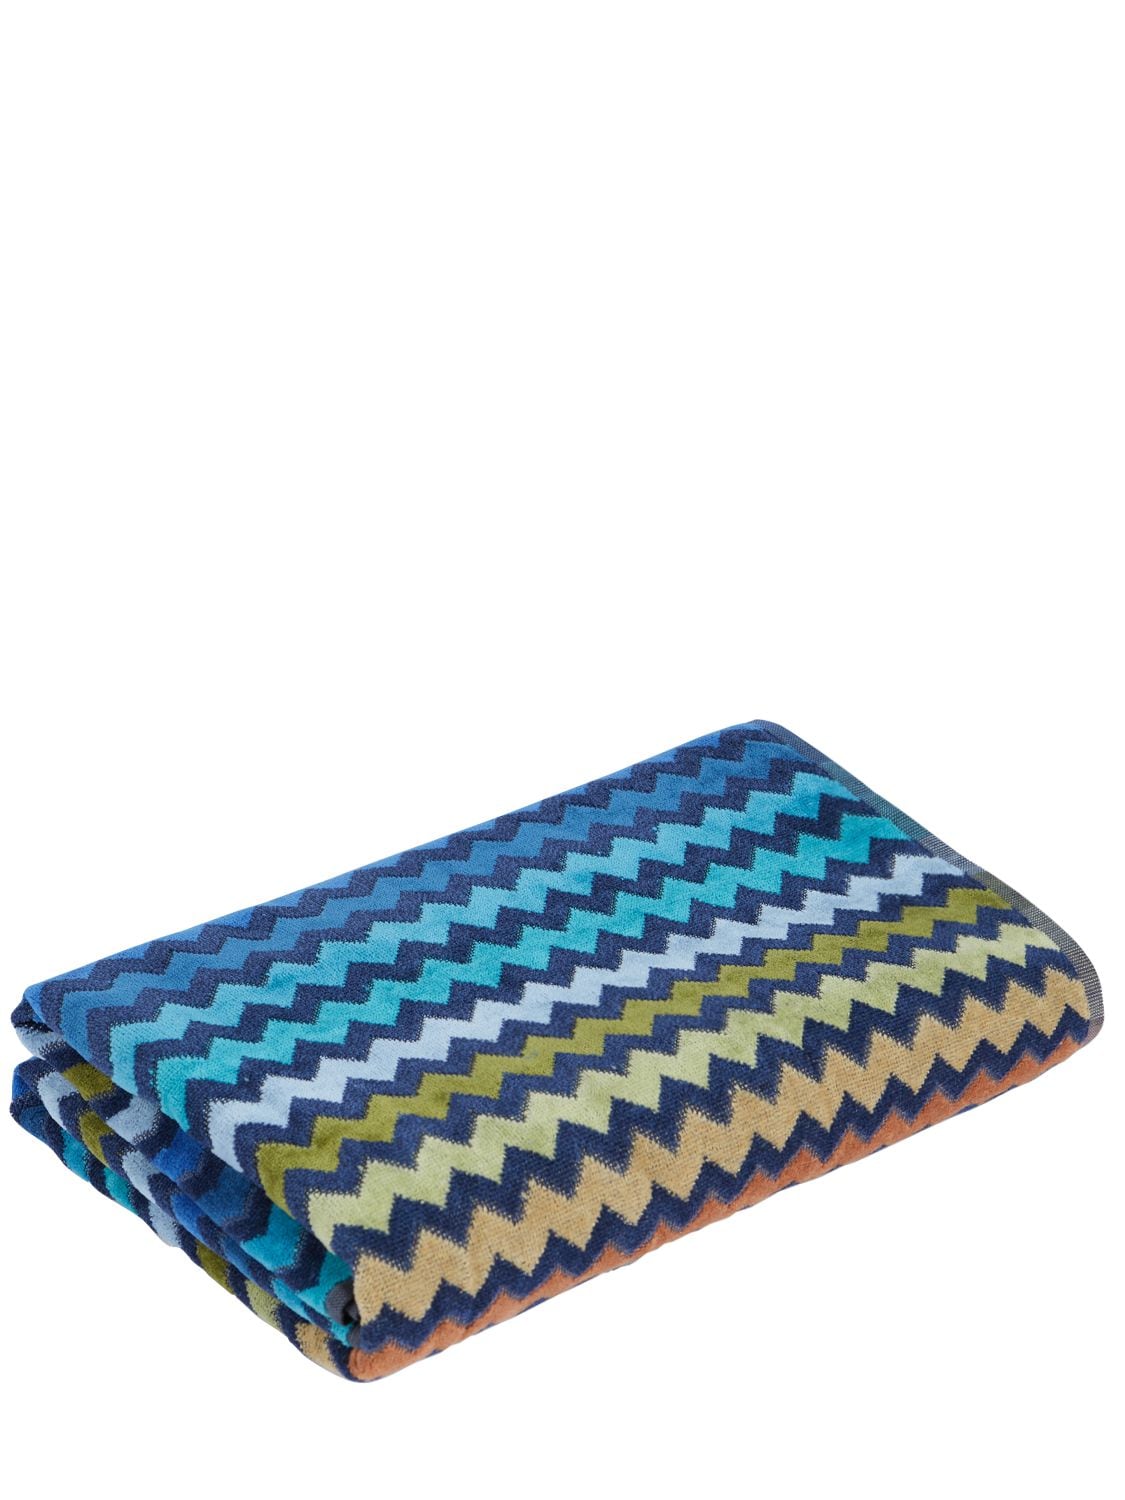 Missoni Home Collection Warner Bath Sheet In Blue